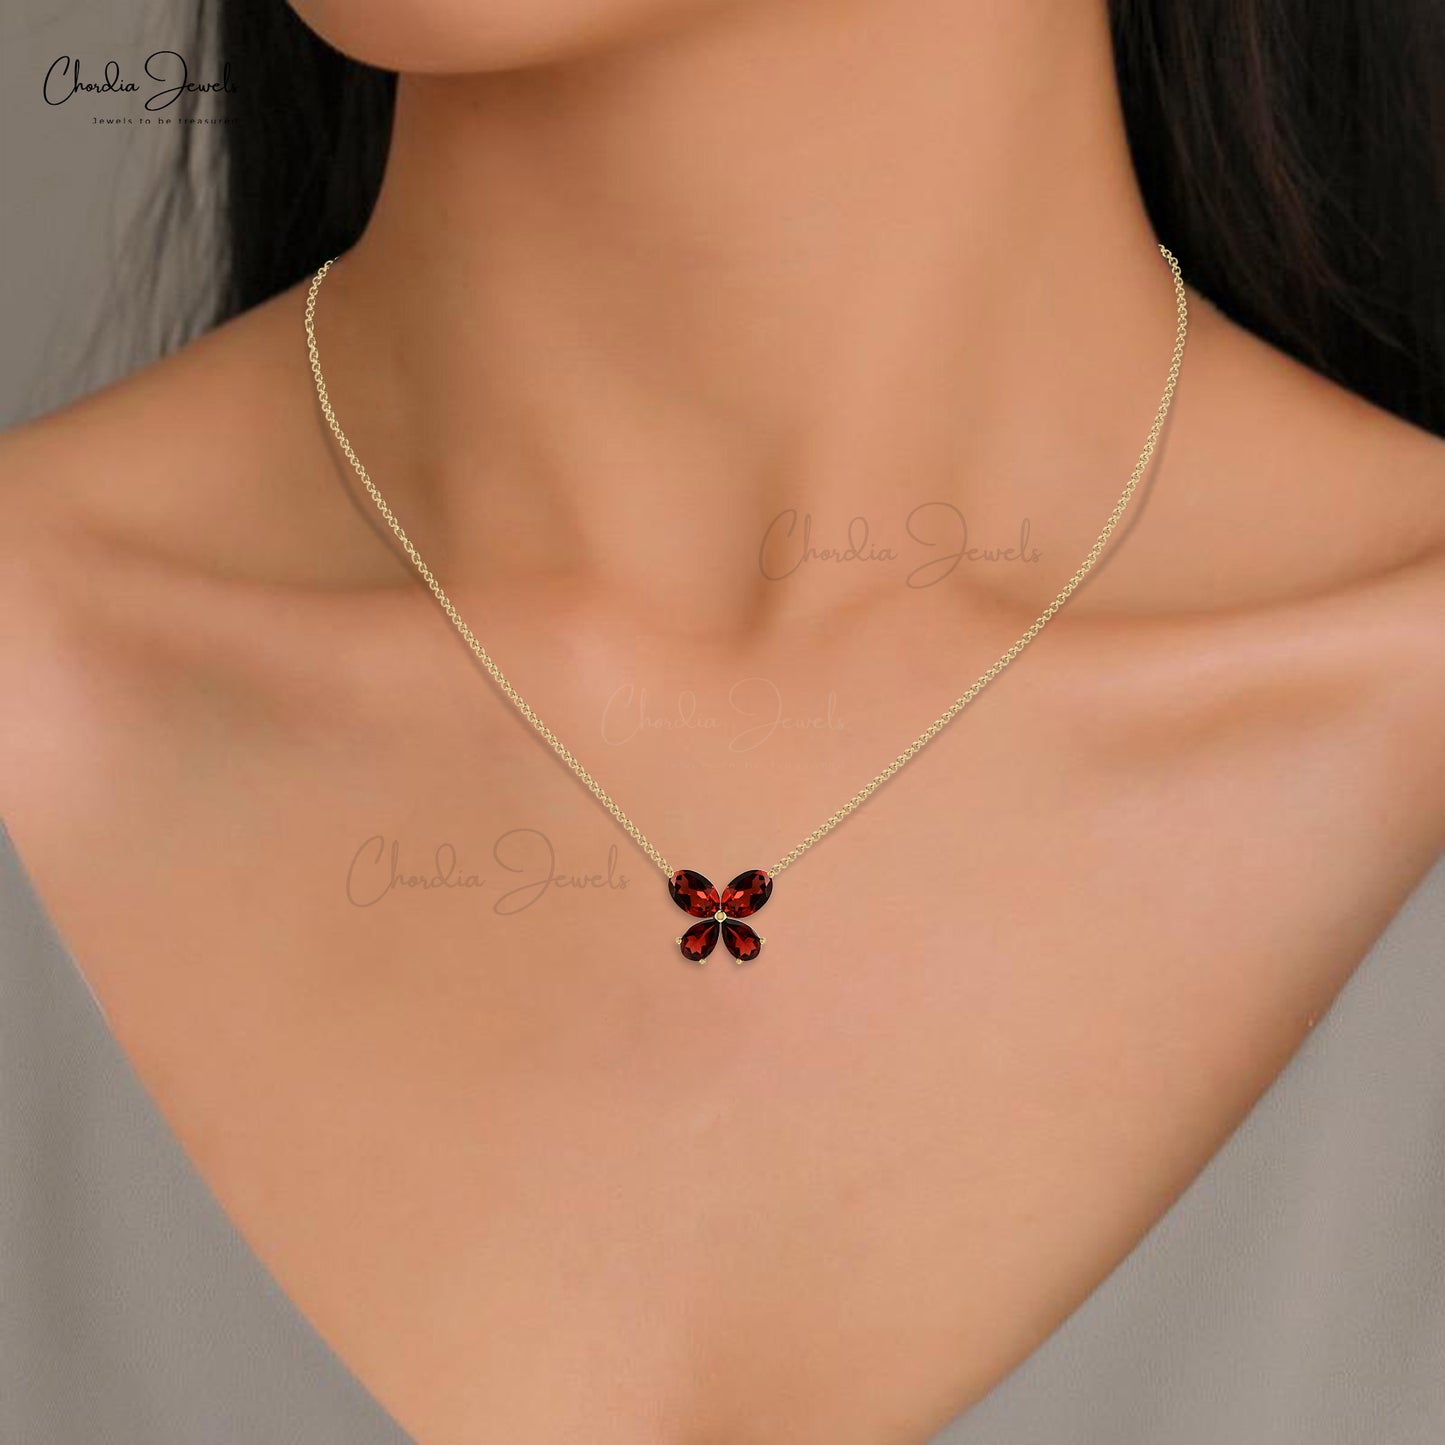 Customized Elegant Natural Garnet Butterfly Necklace Pendant Oval Shape 4-Stone Necklace in 14k Solid Gold Valentine Day Gift For Love Ones